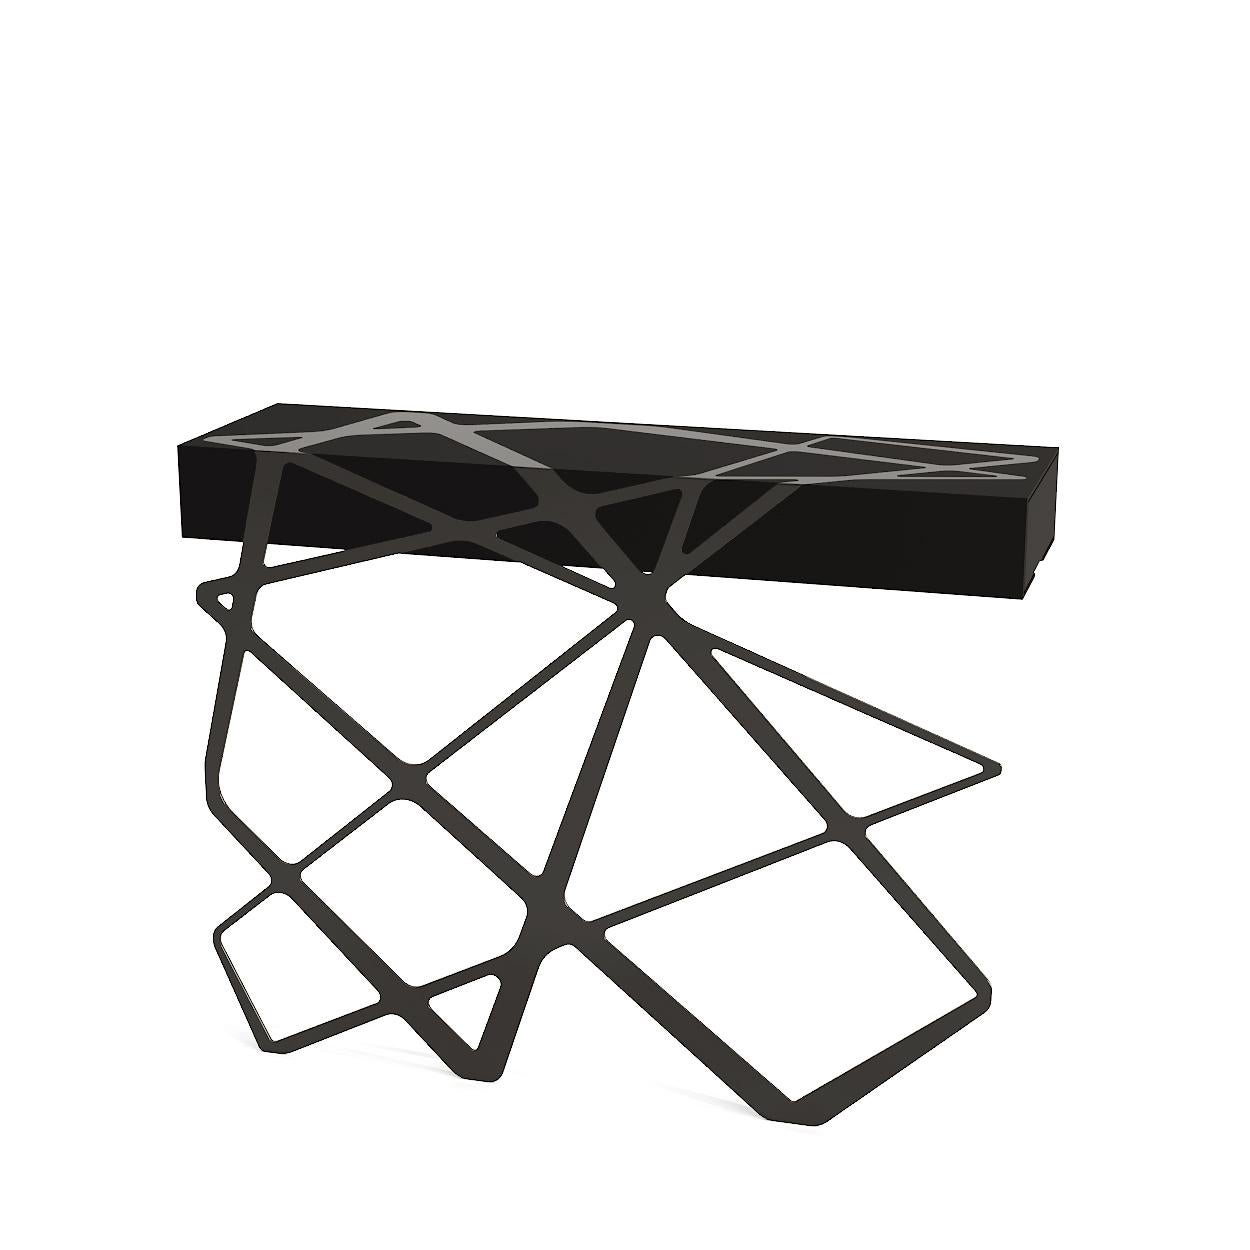 Portuguese Organic Modern Accent Console Table High-Gloss Black Steel Matte Black Lacquer For Sale